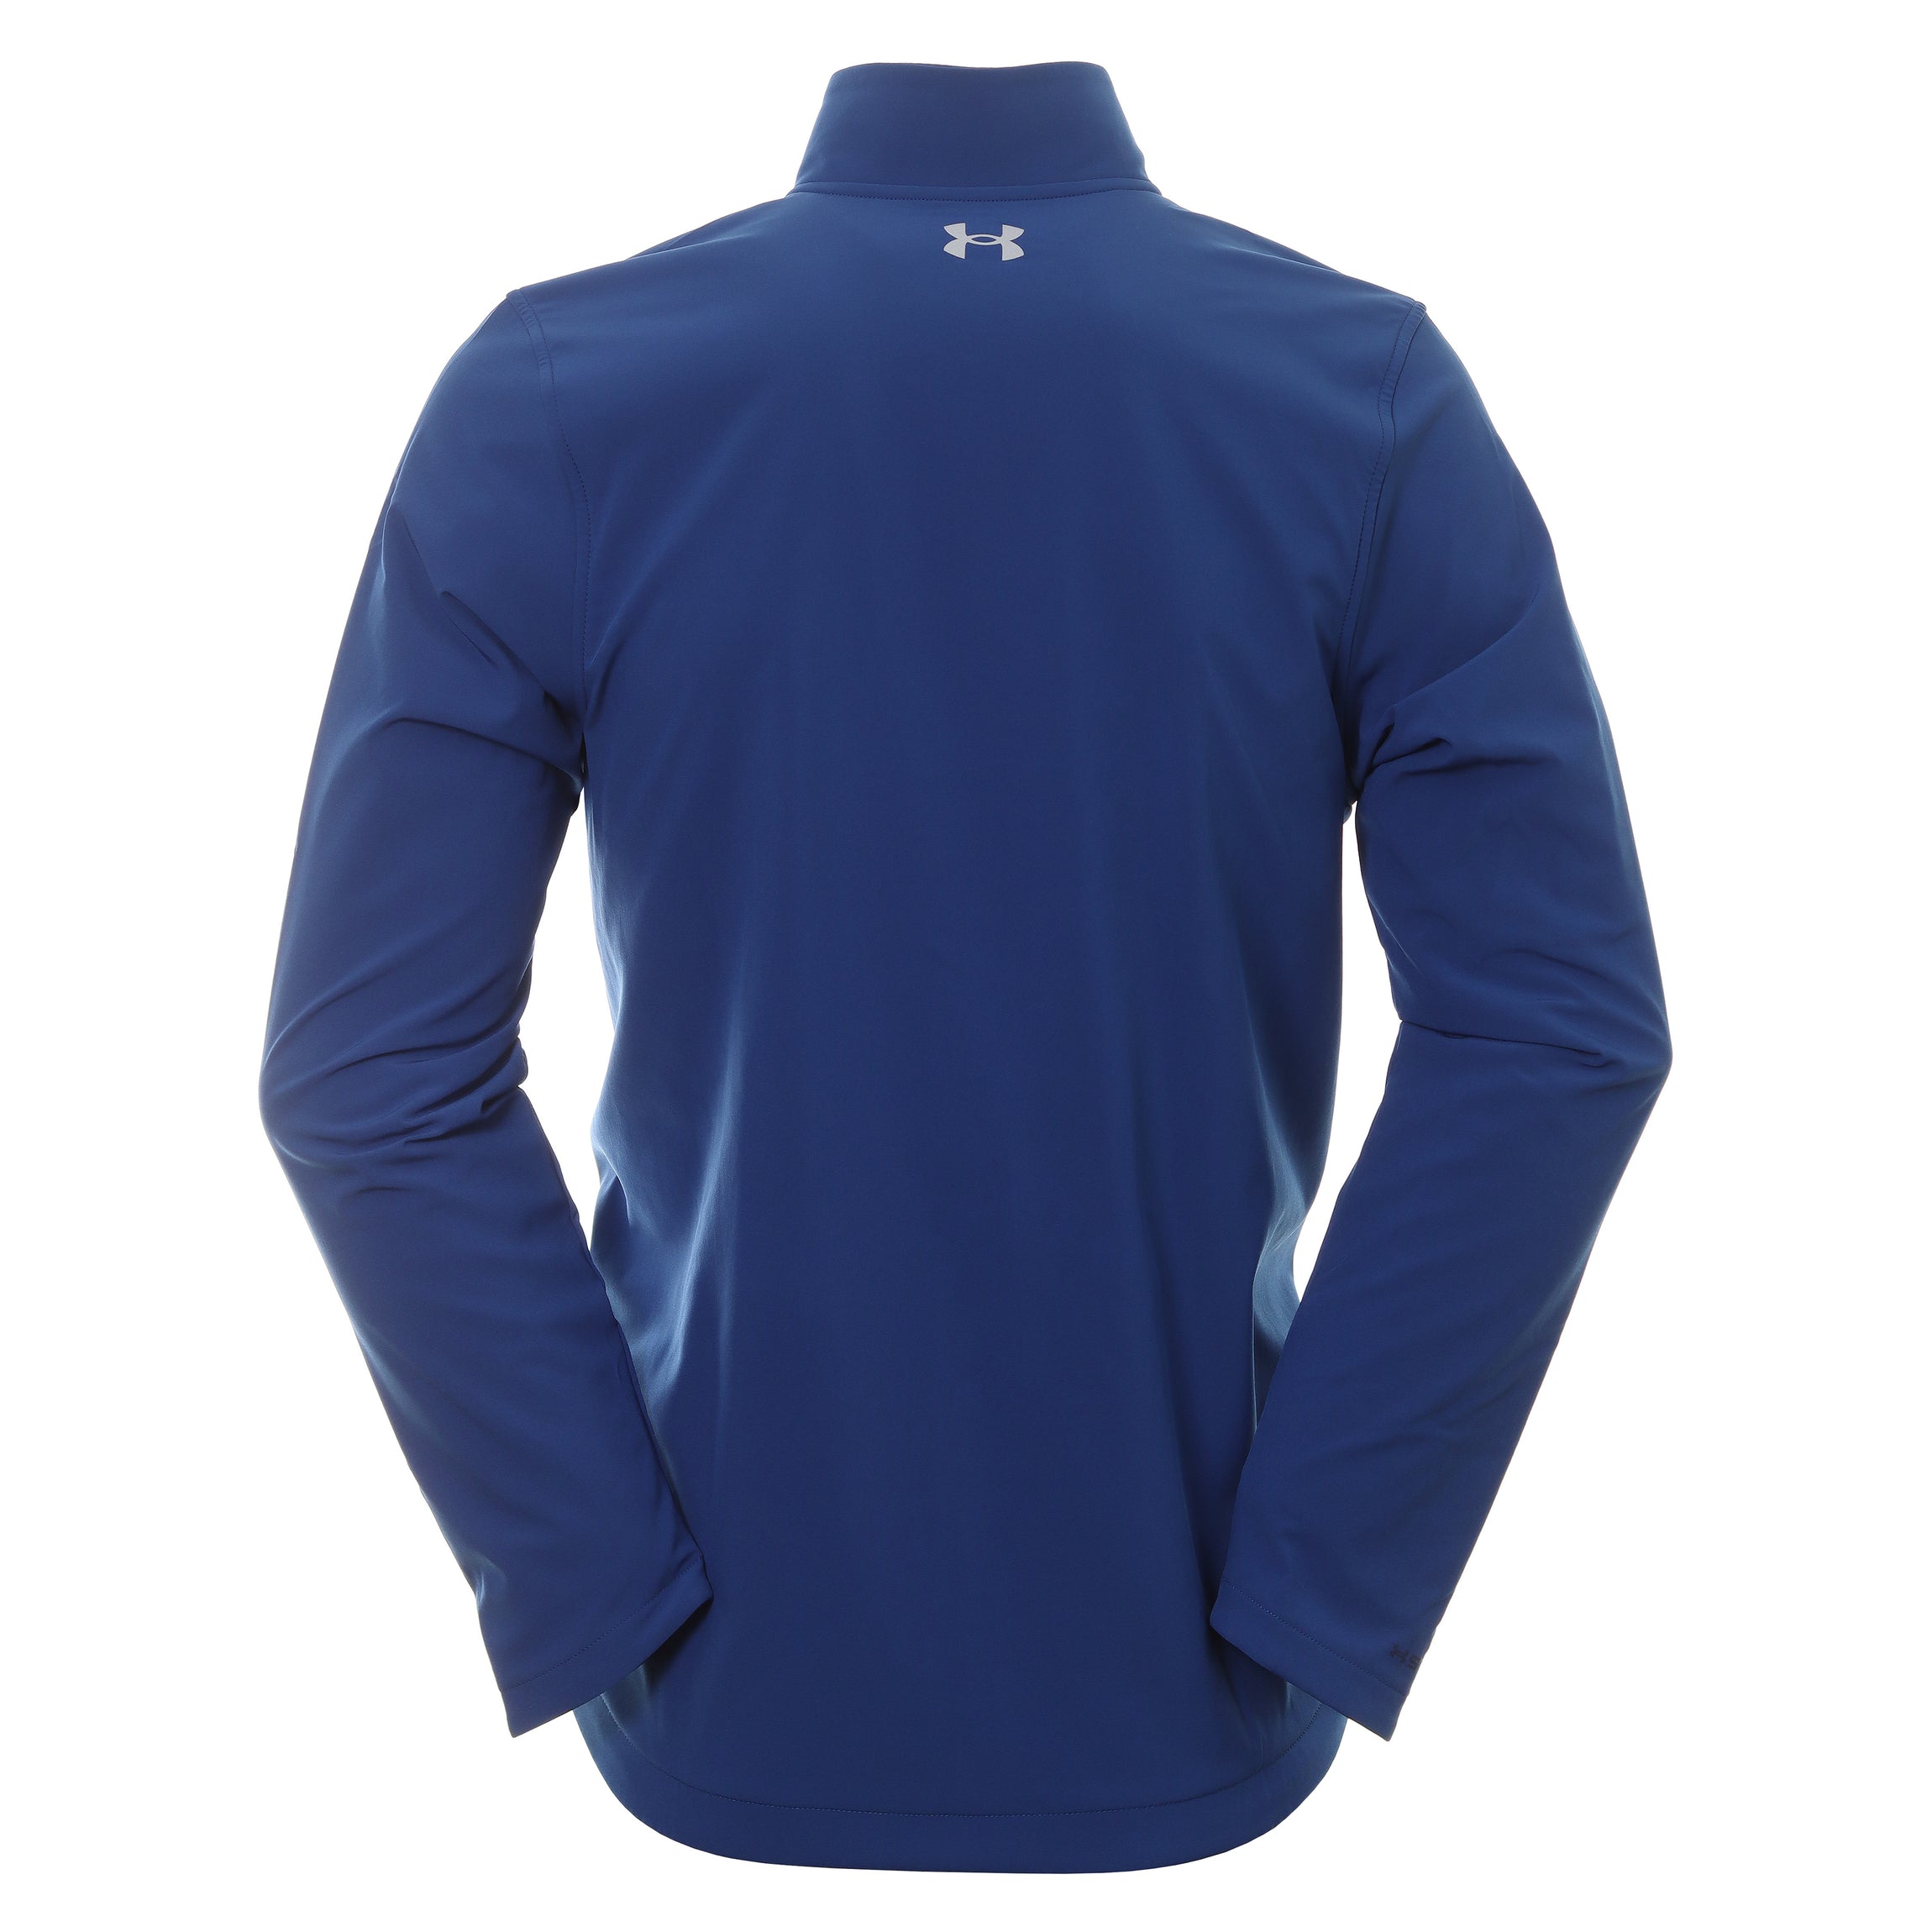 Under Armour 1366091-716 Mens' Mission Full-Zip Jacket